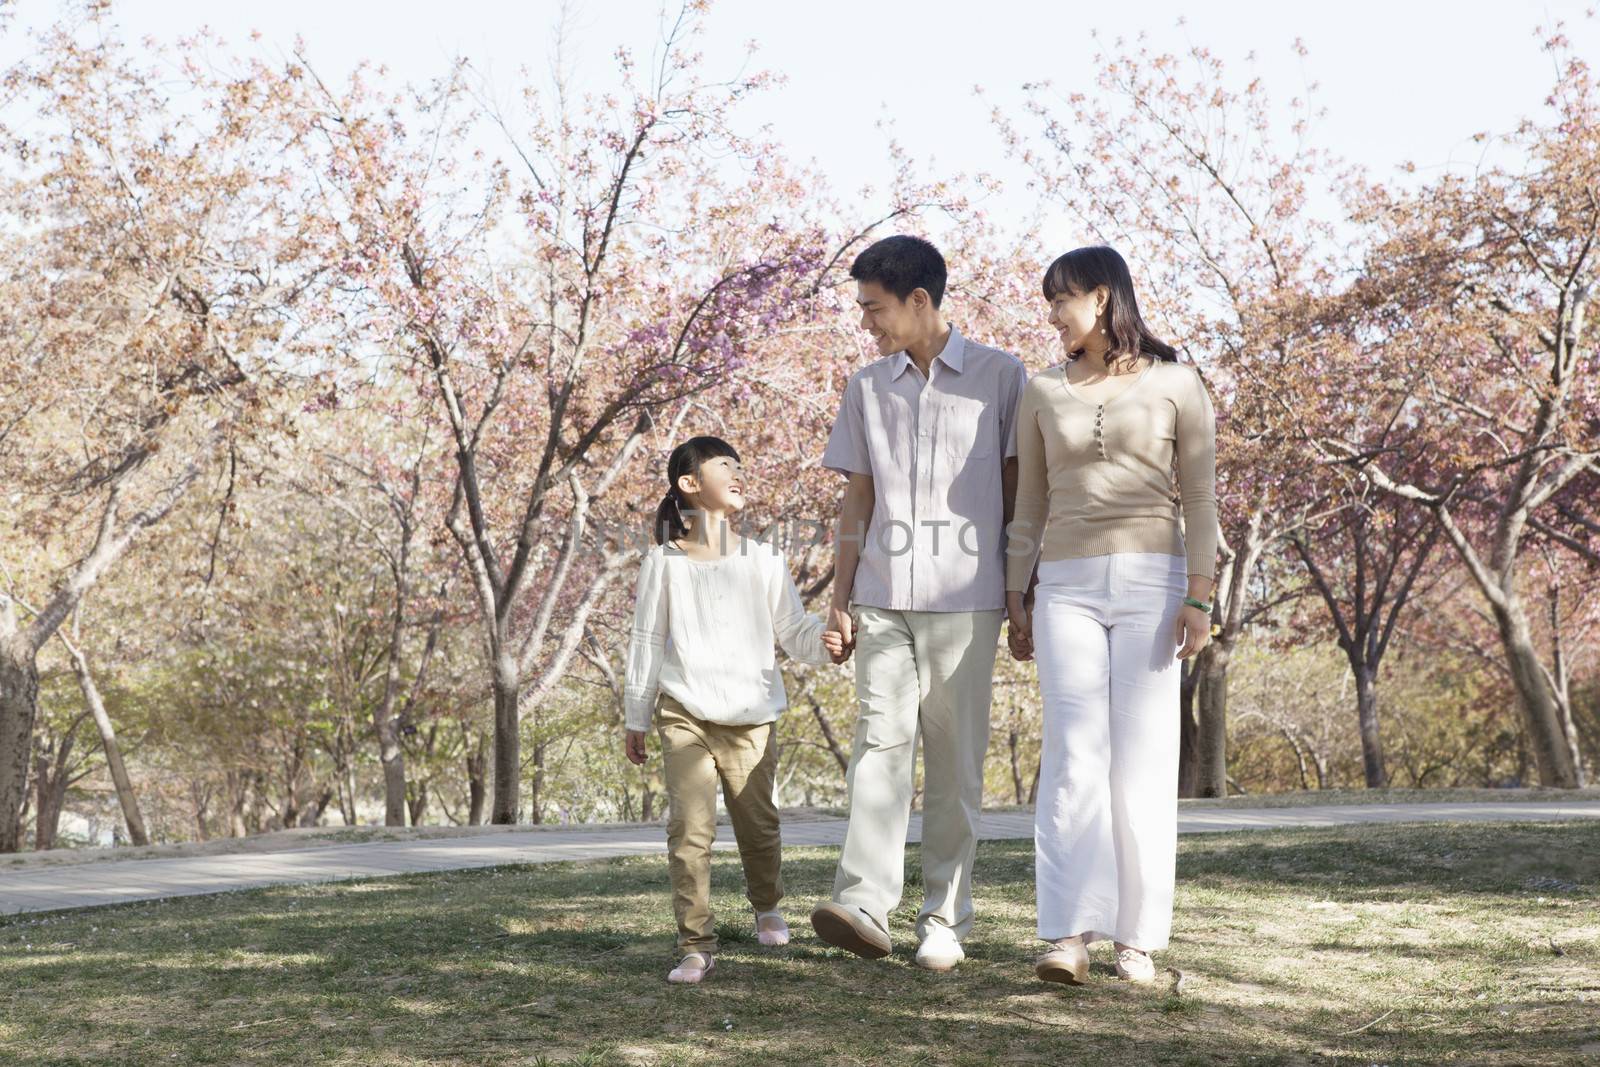 Happy family taking a walk amongst the cherry trees in a park in springtime, Beijing